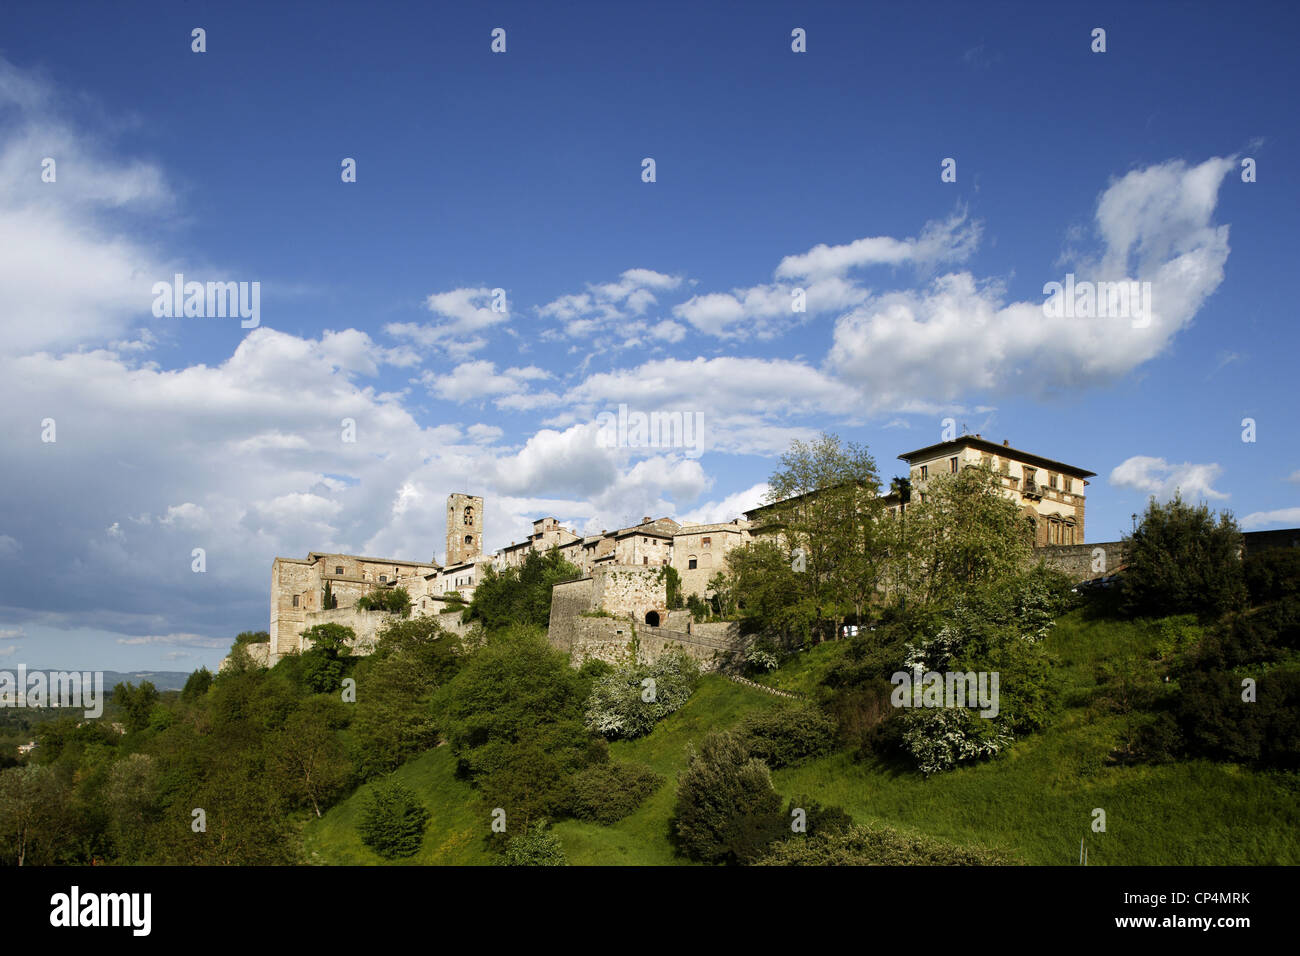 The suburb with Campana Palace. Italy, Tuscany Region, Colle Val d'Elsa (Si). Stock Photo